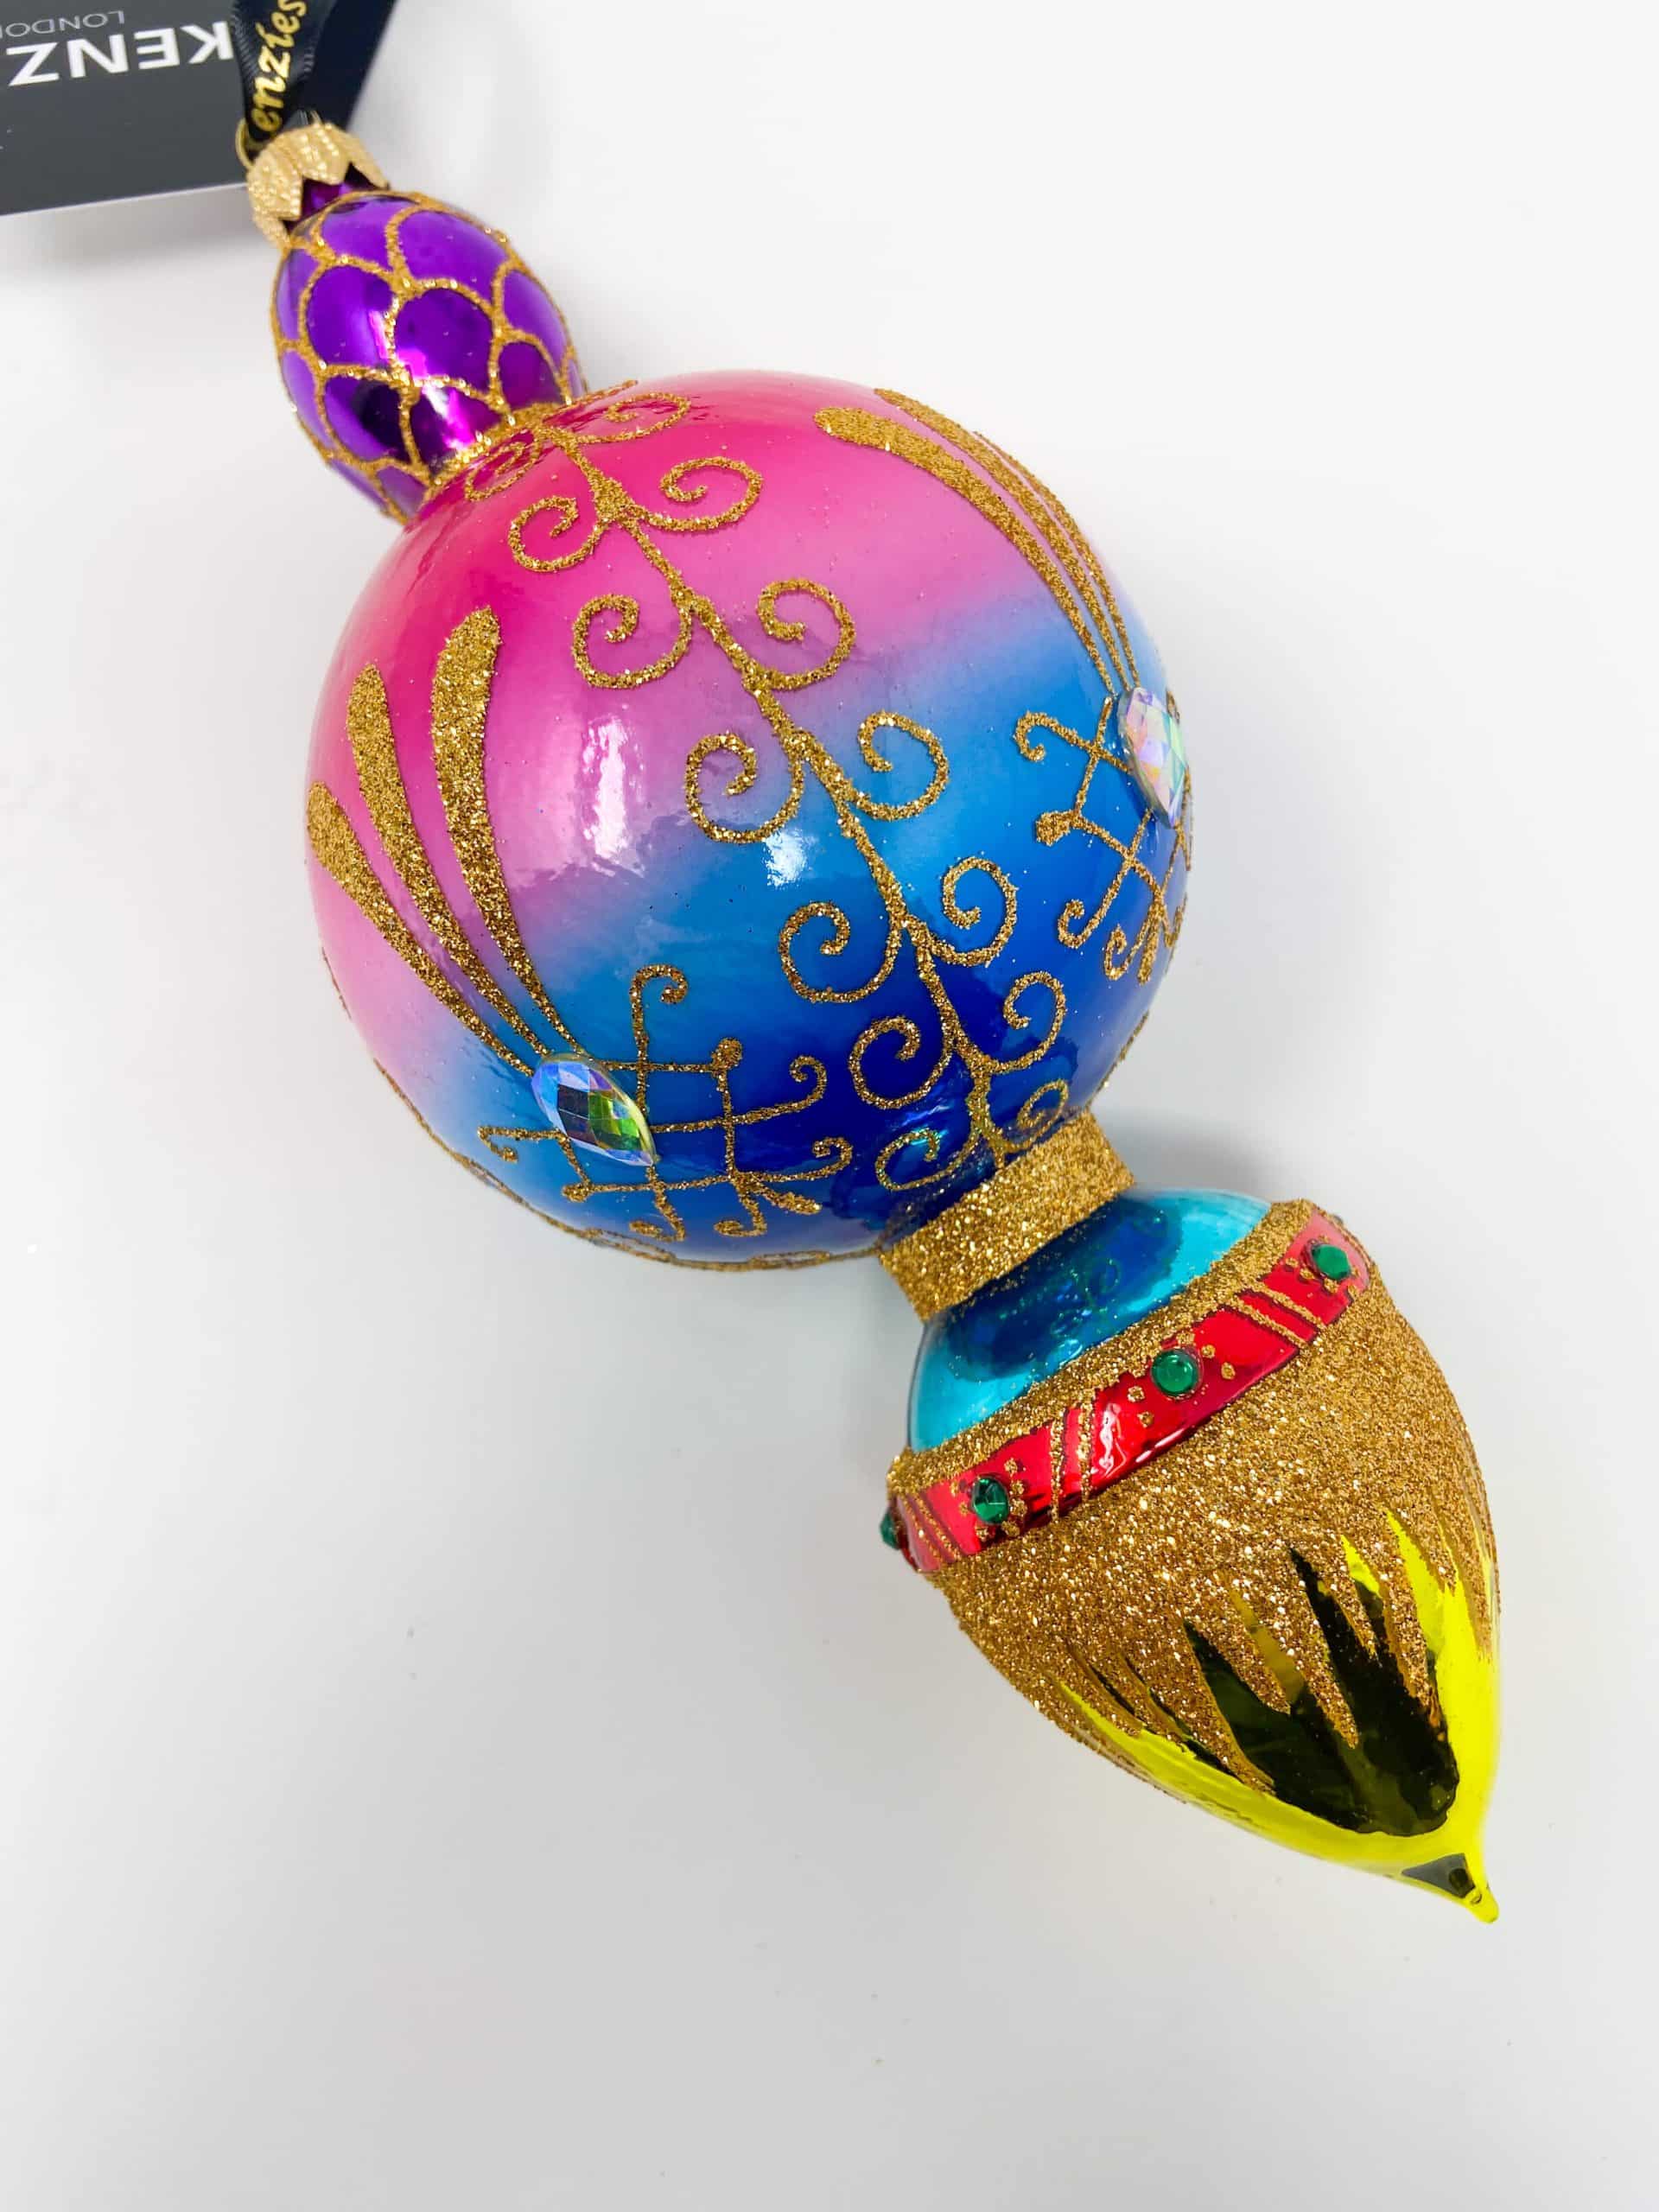 Las Vegas collection ornament featuring spinning reflector and rainbow neon colors reflecting the Las Vegas Strip. Inspired by casinos. Christmas ornament made from hand blown polish glass.